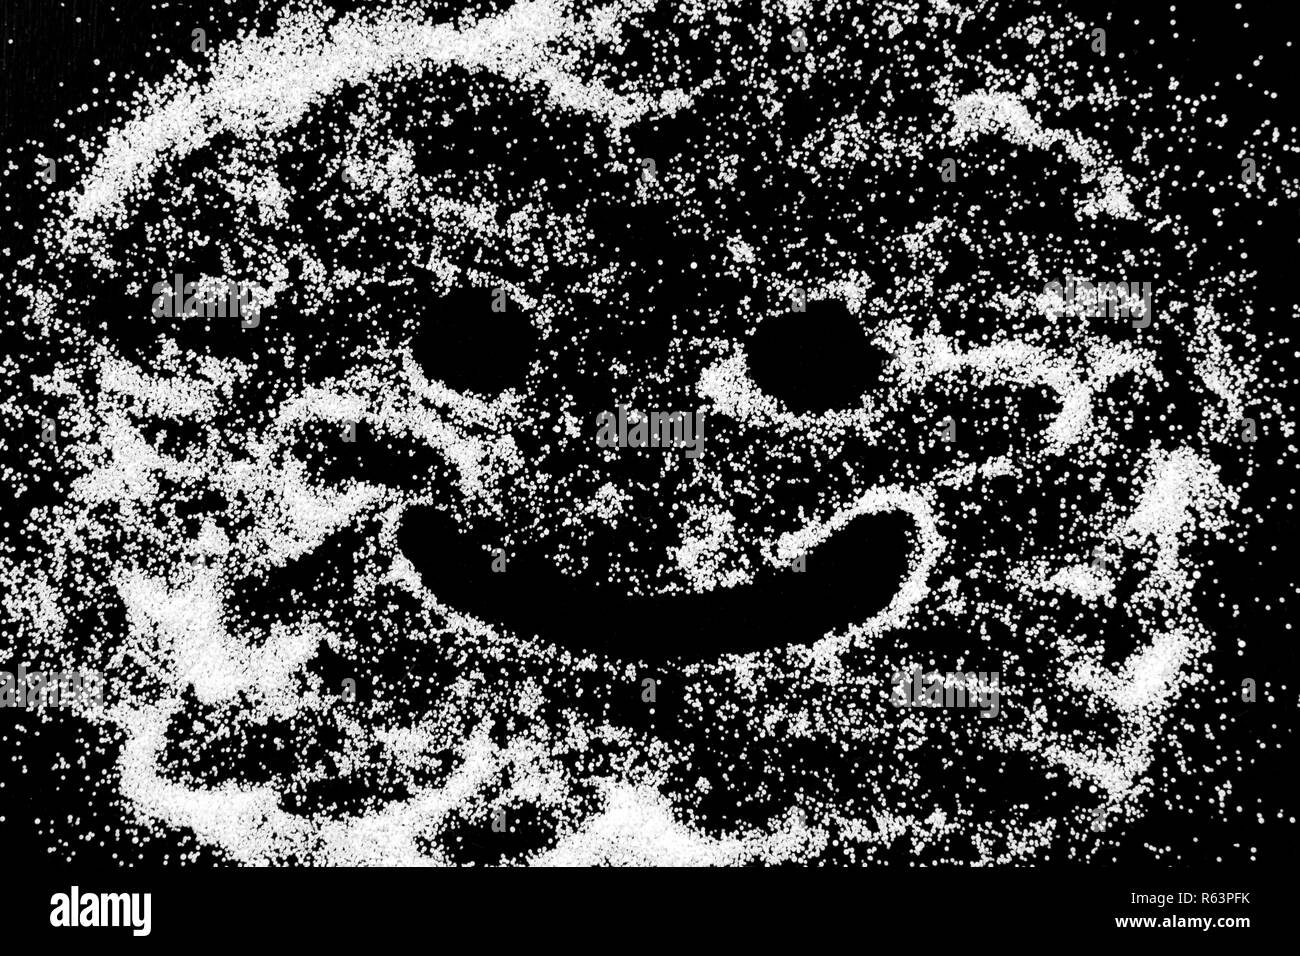 Symbol happy smile emoticon drawing by finger on white snow salt powder on black background. Concept with place for text. Copy space. Stock Photo